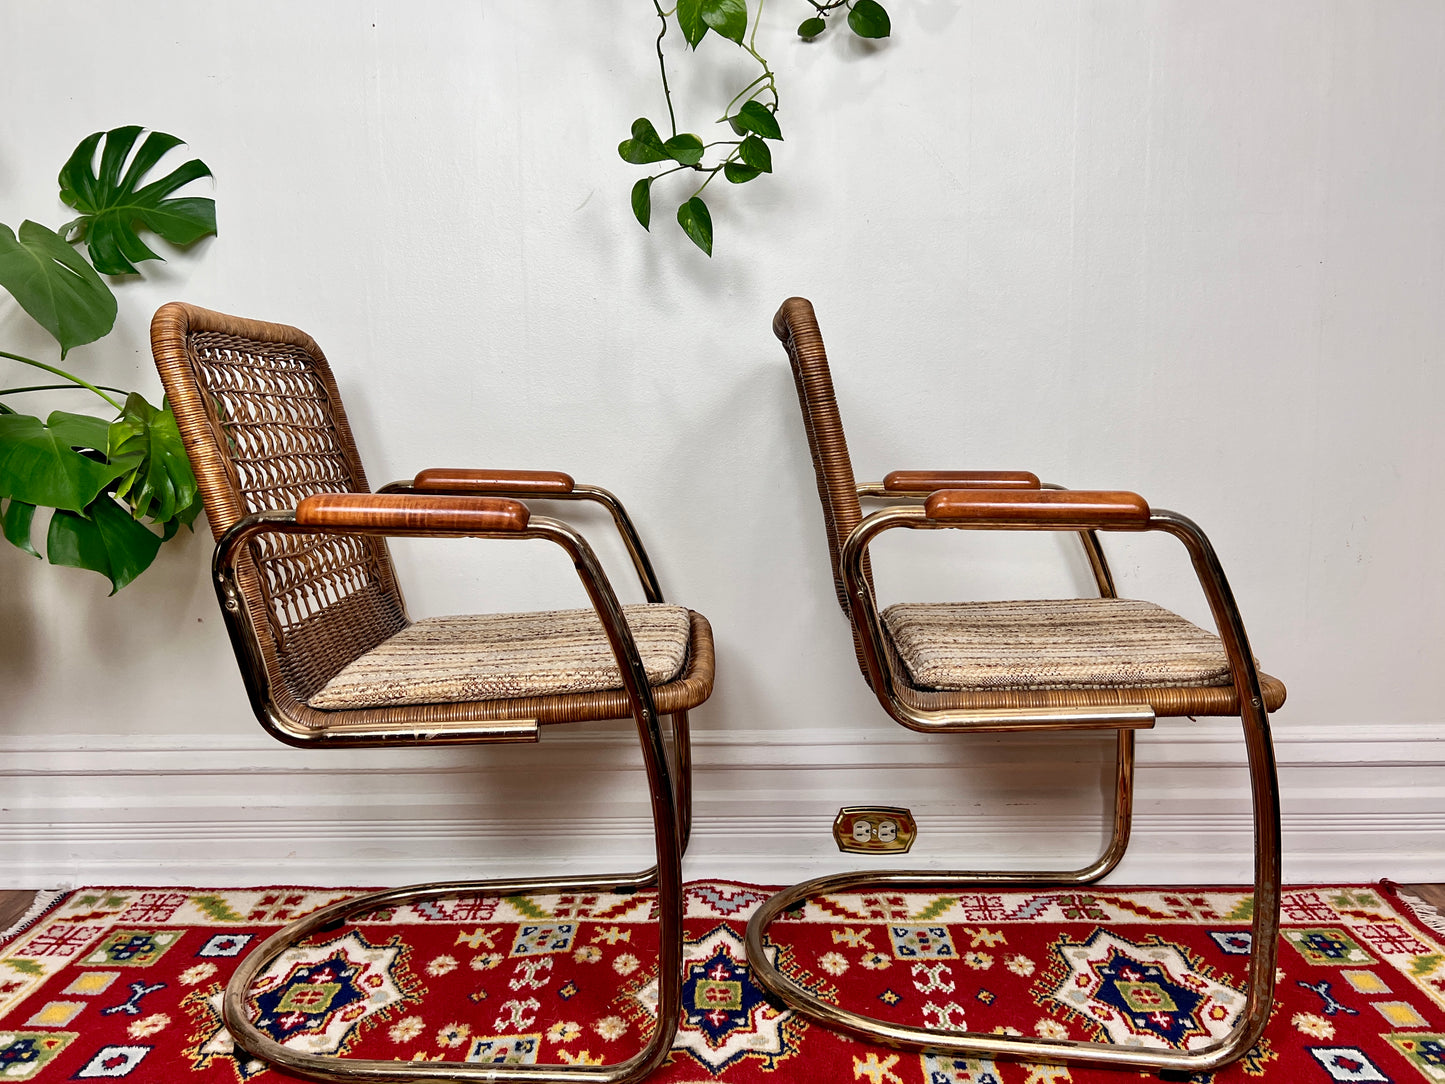 The Marcel Chairs